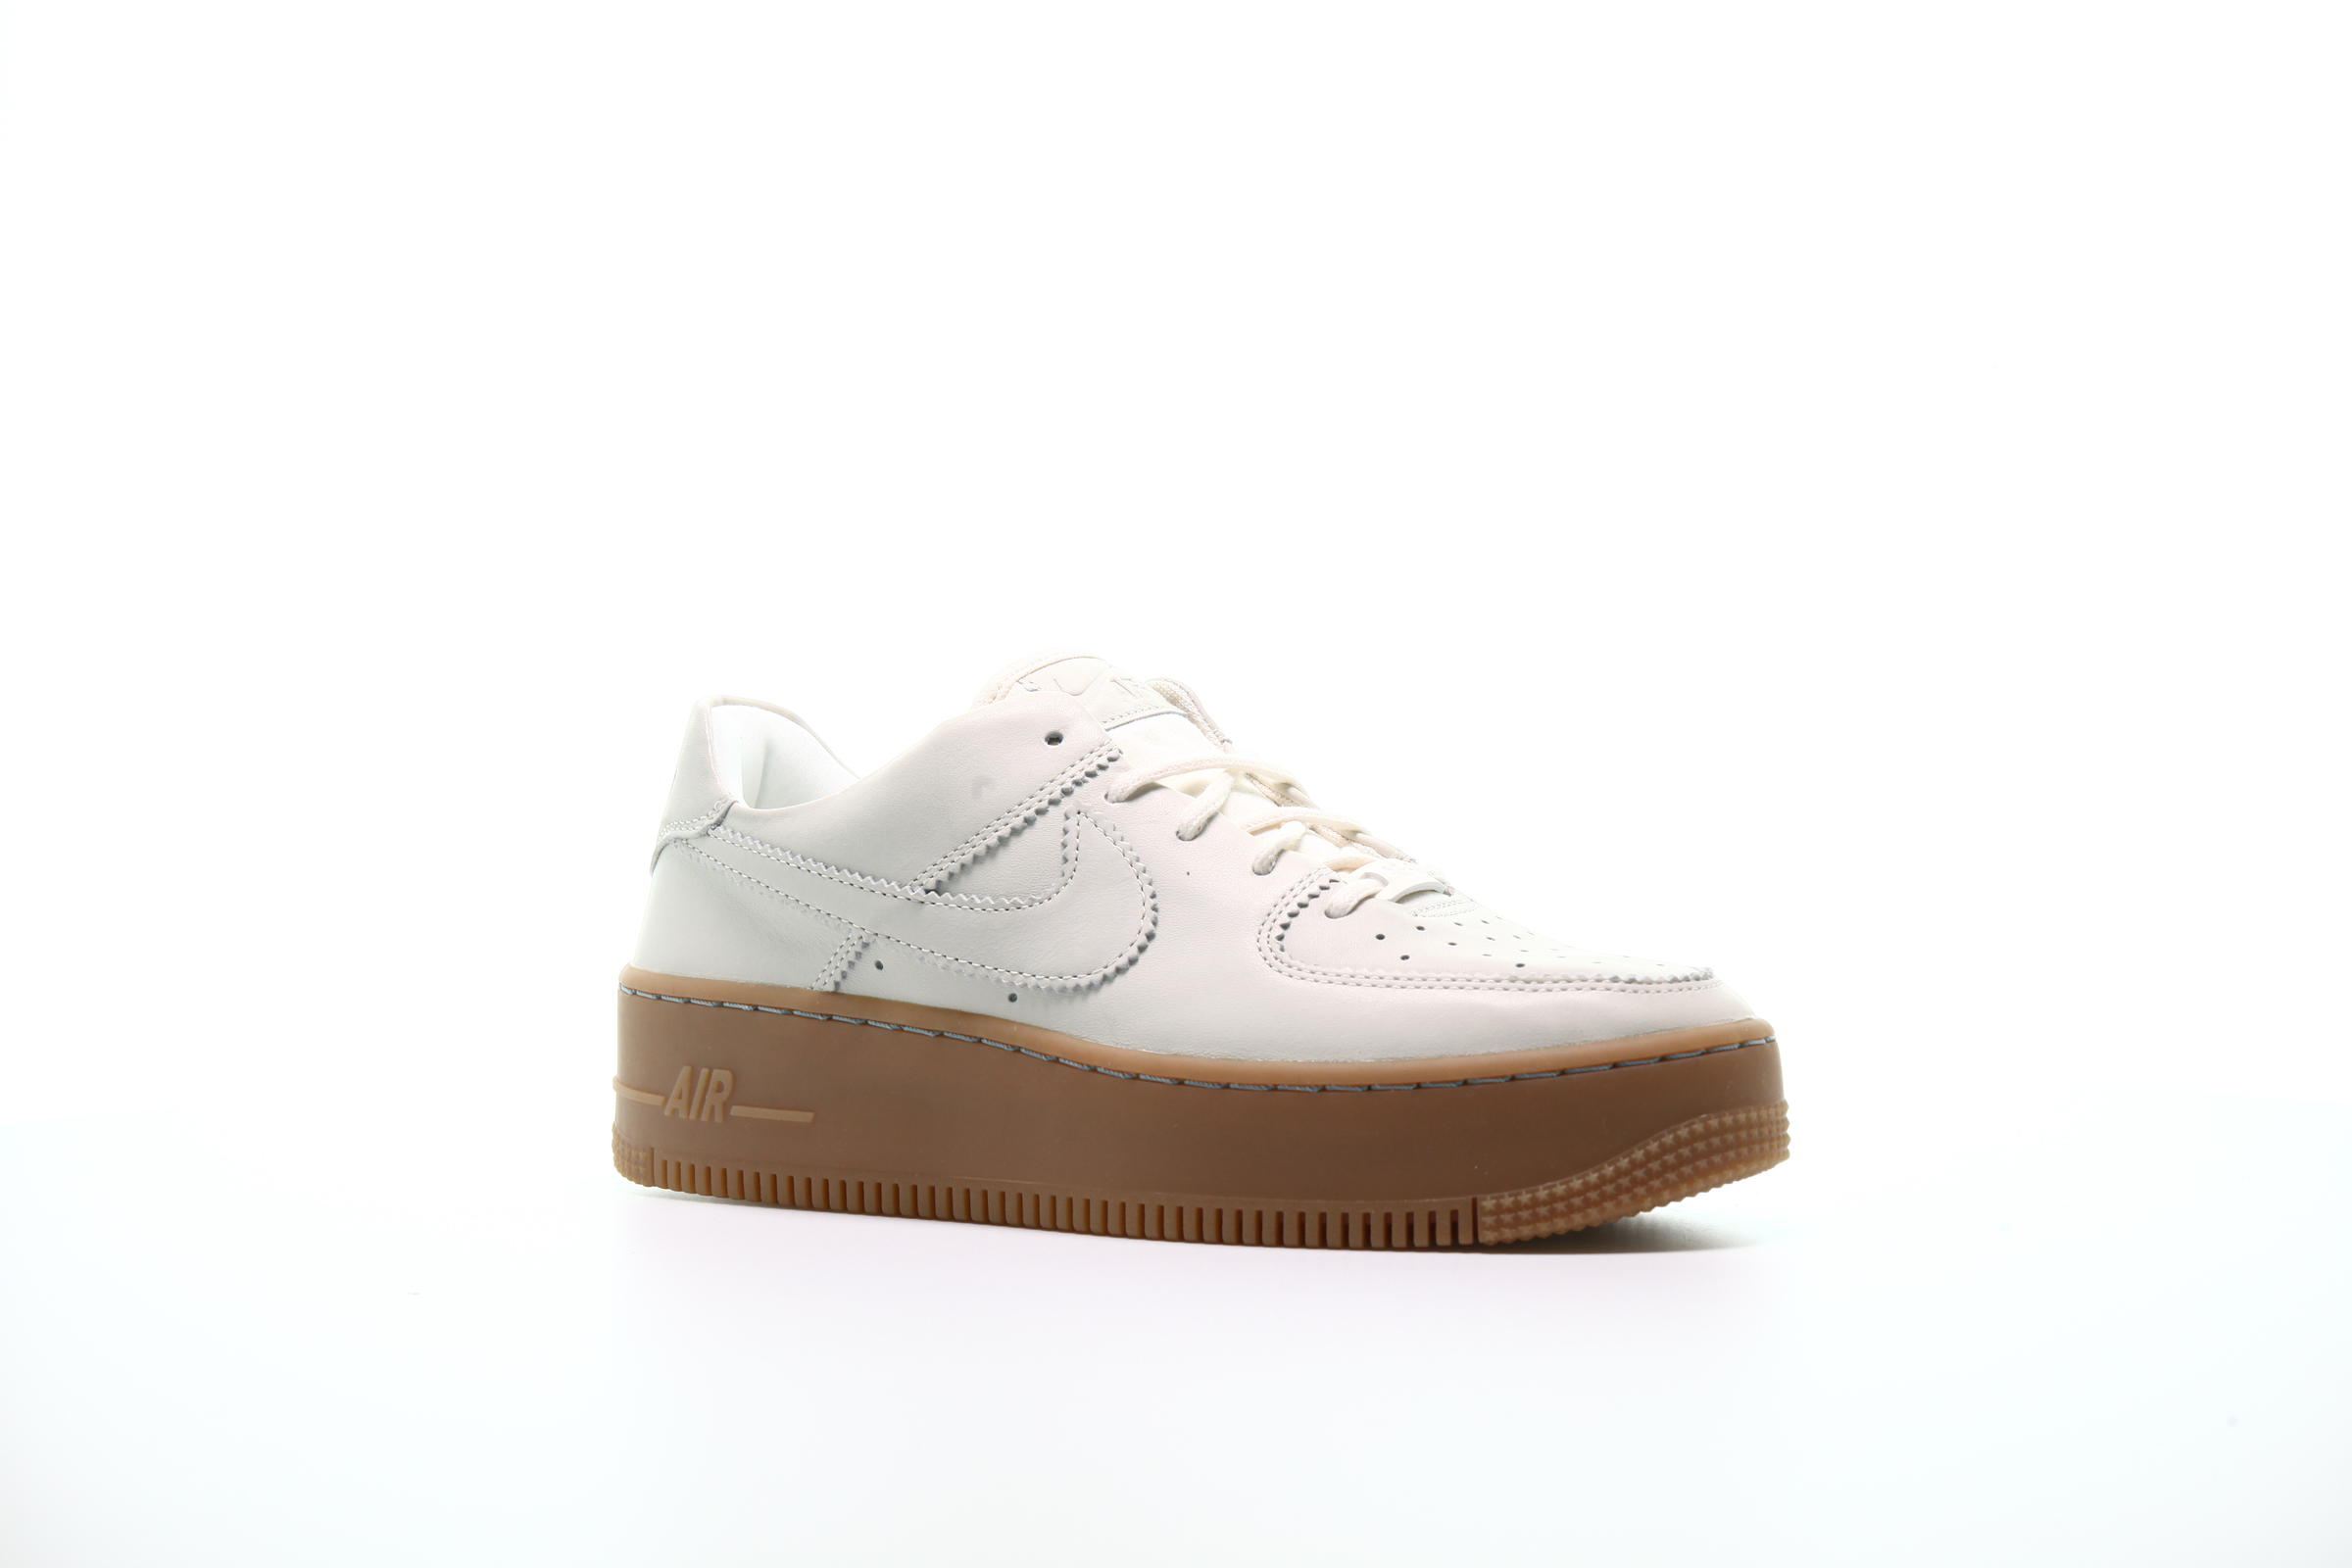 Nike WMNS Air Force 1 Sage Low LX "Pale Ivory"